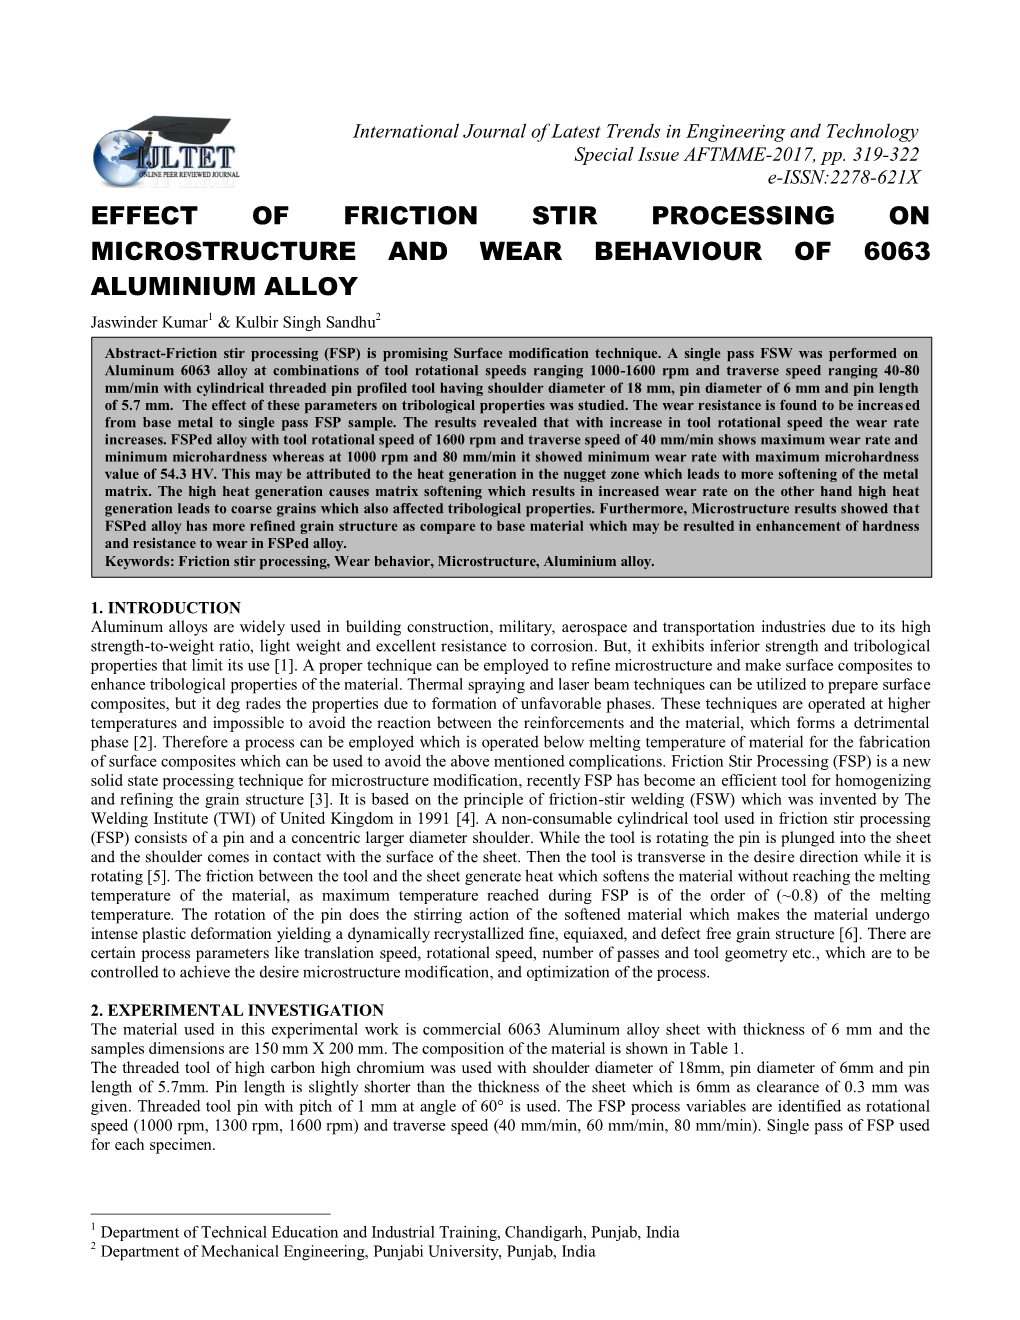 Effect of Friction Stir Processing on Microstructure and Wear Behaviour of 6063 Aluminium Alloy